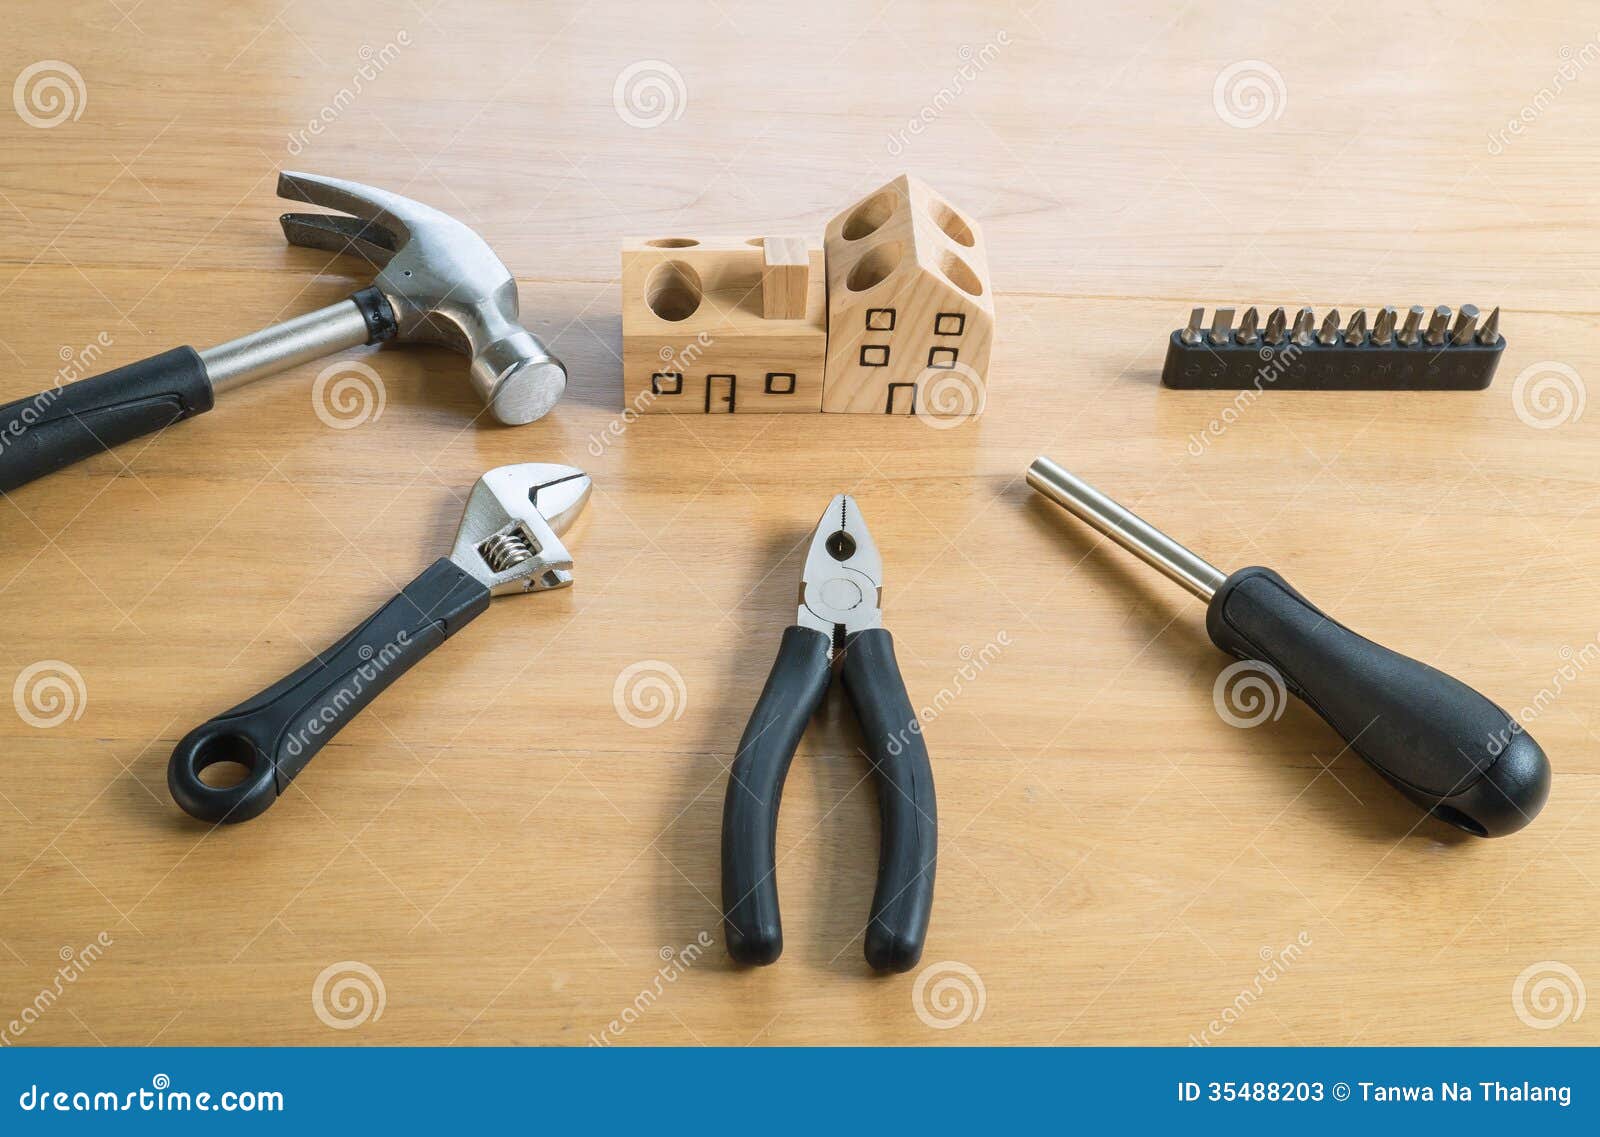 Set Of Tools And Handmade Wood House Toy. Stock Photos 